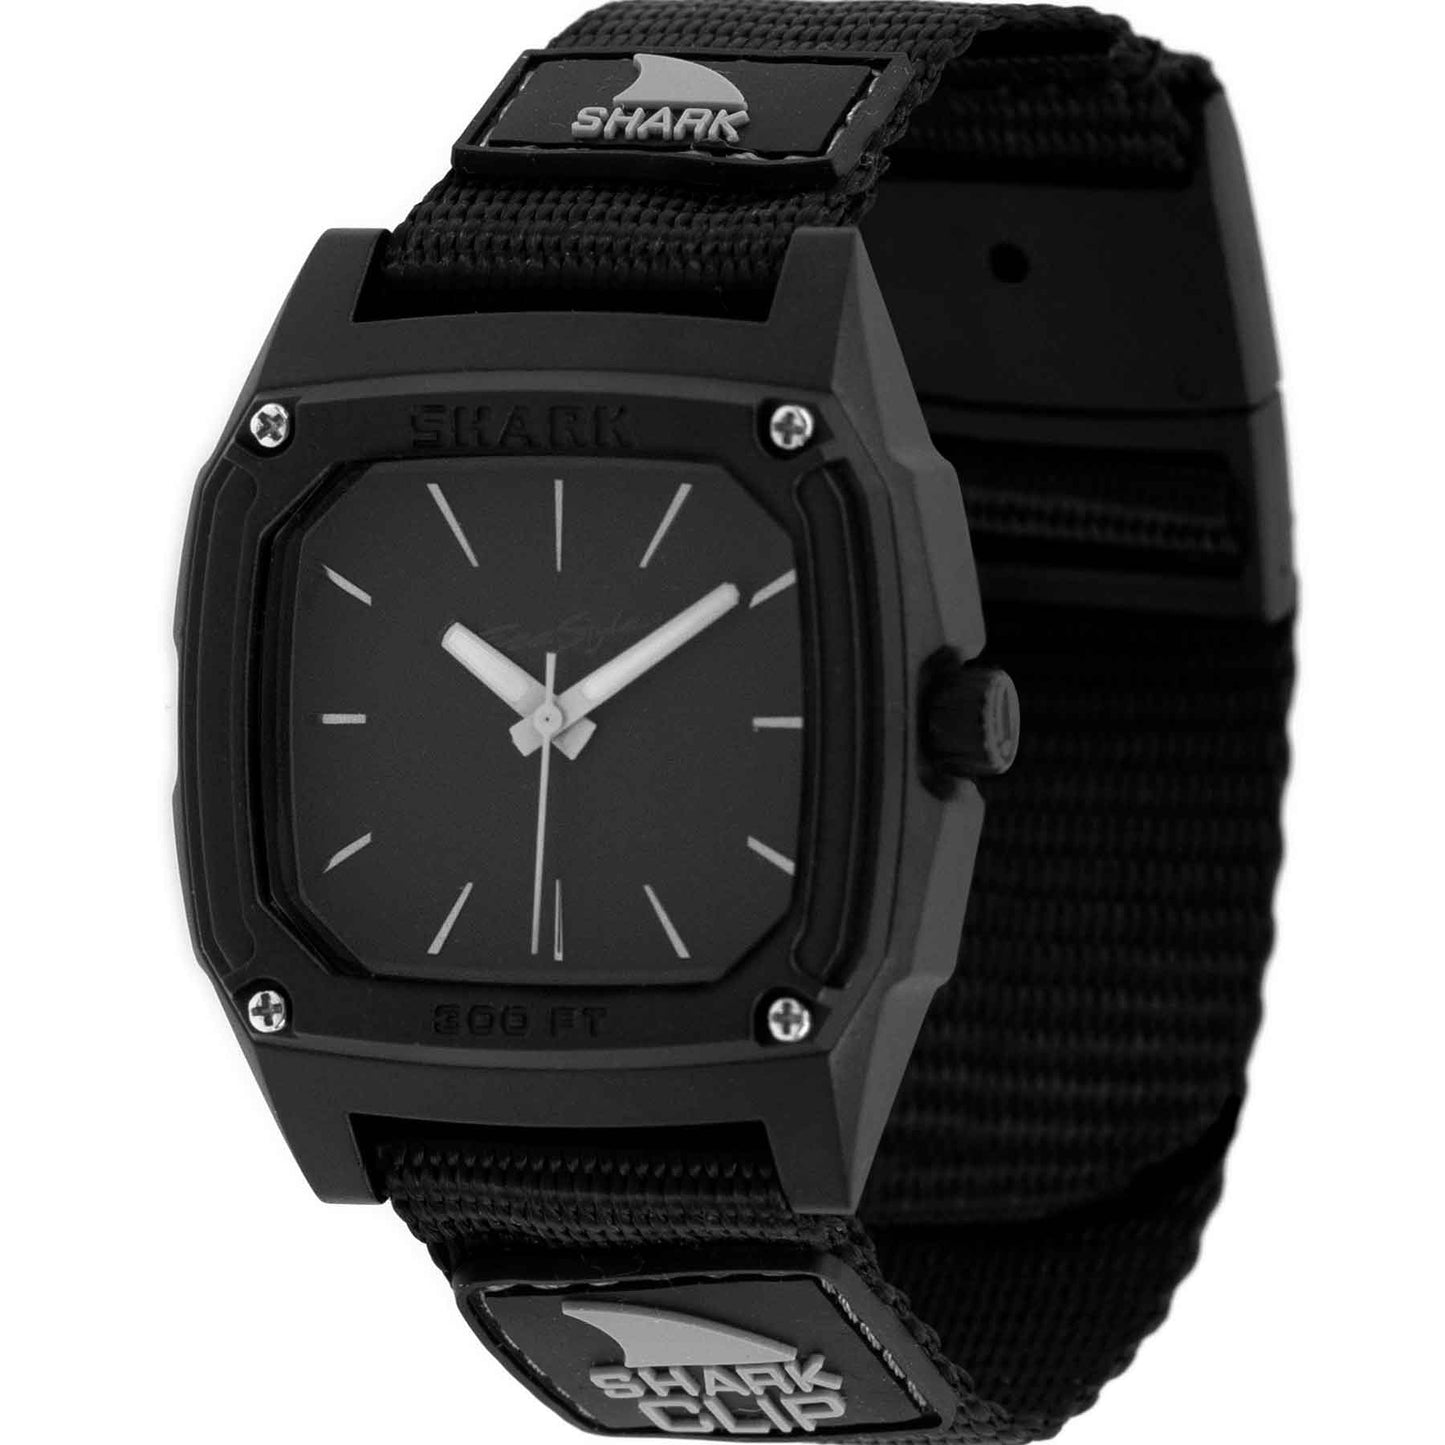 Freestyle Watches Shark Classic Clip Analog Watch - Black Out